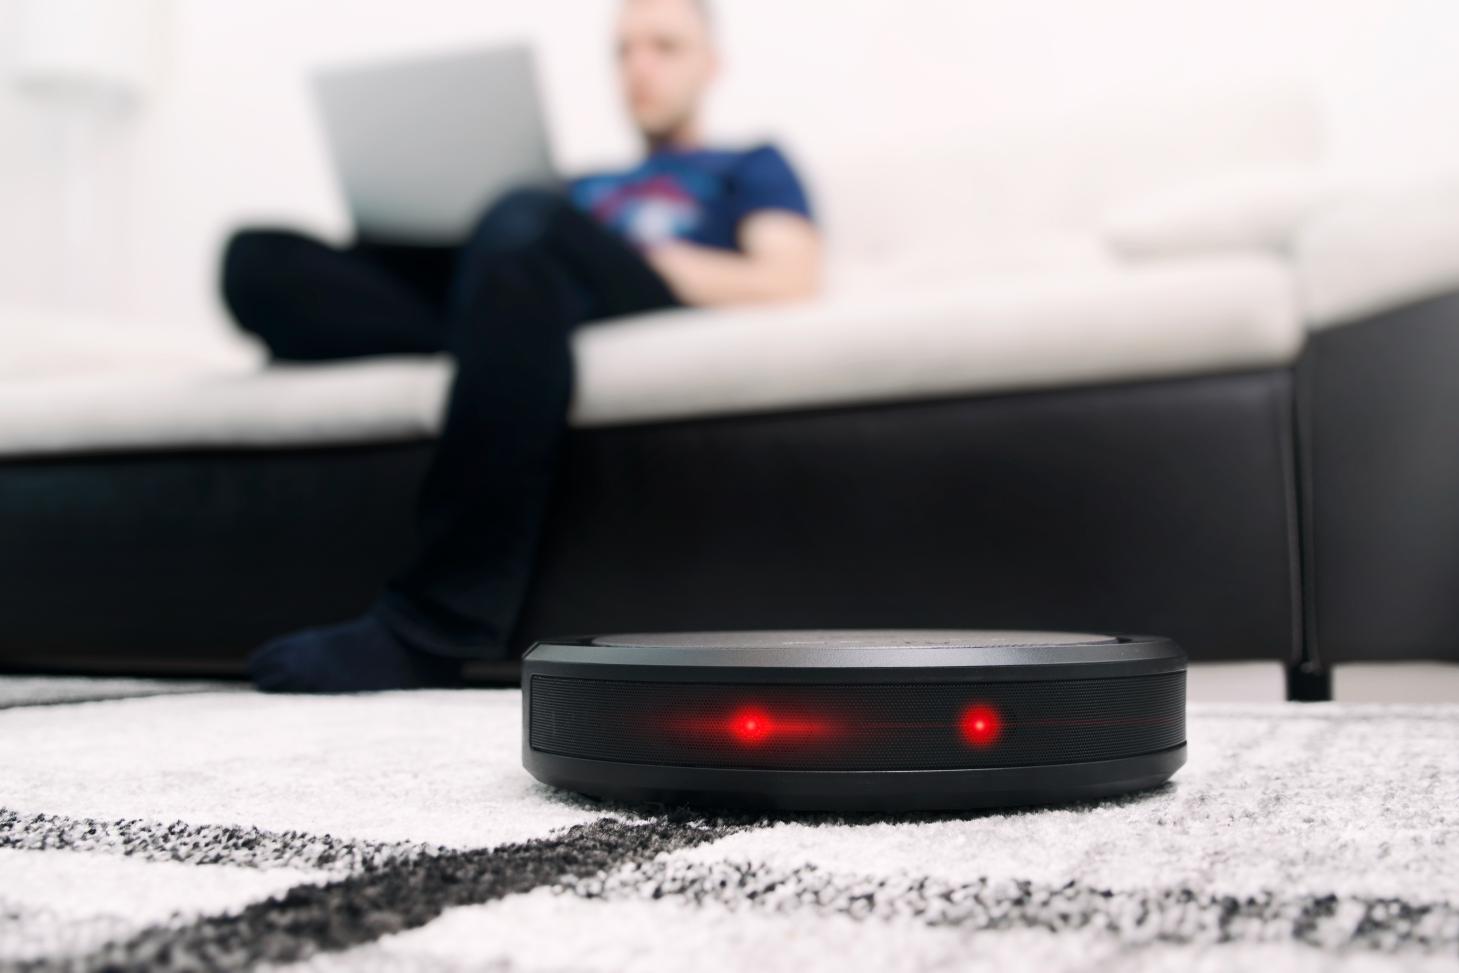 A robot vacuum cleaner in a house